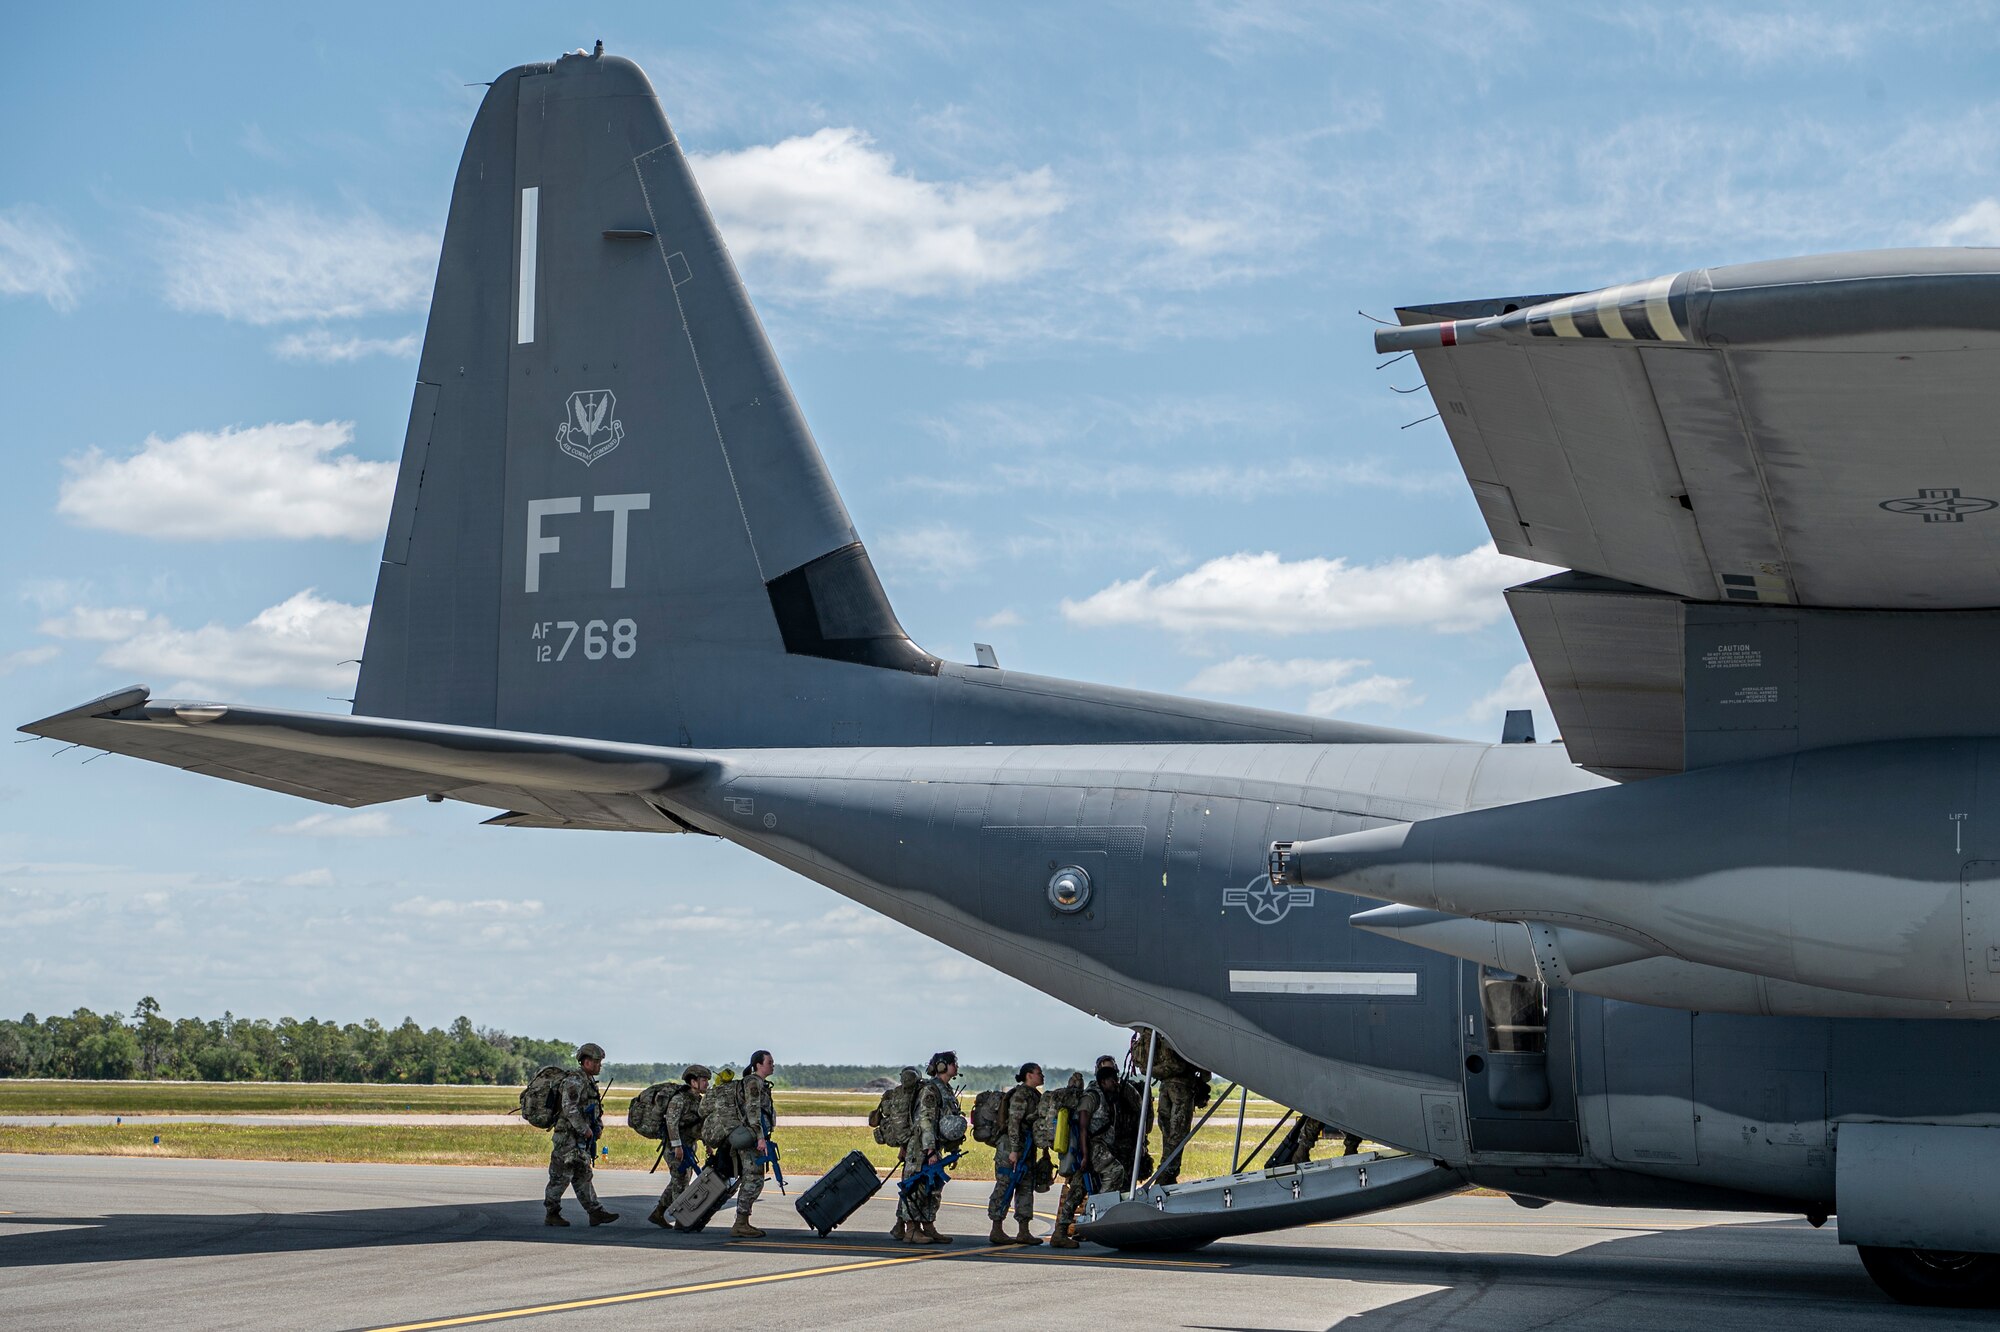 U.S. Air Force Airmen assigned to the 23rd Wing line up to board HC-130J Combat King II for Exercise Ready Tiger 24-1 at Avon Park Air Force Range, Florida, April 10, 2024. HC-130J aircraft are flexible fixed-wing platforms that enable Airmen to execute transport and combat search and rescue missions. Ready Tiger 24-1 is a readiness exercise demonstrating the 23rd Wing’s ability to plan, prepare and execute operations and maintenance to project air power in contested and dispersed locations, defending the United States’ interests and allies. (U.S. Air Force photo by Airman 1st Class Leonid Soubbotine)